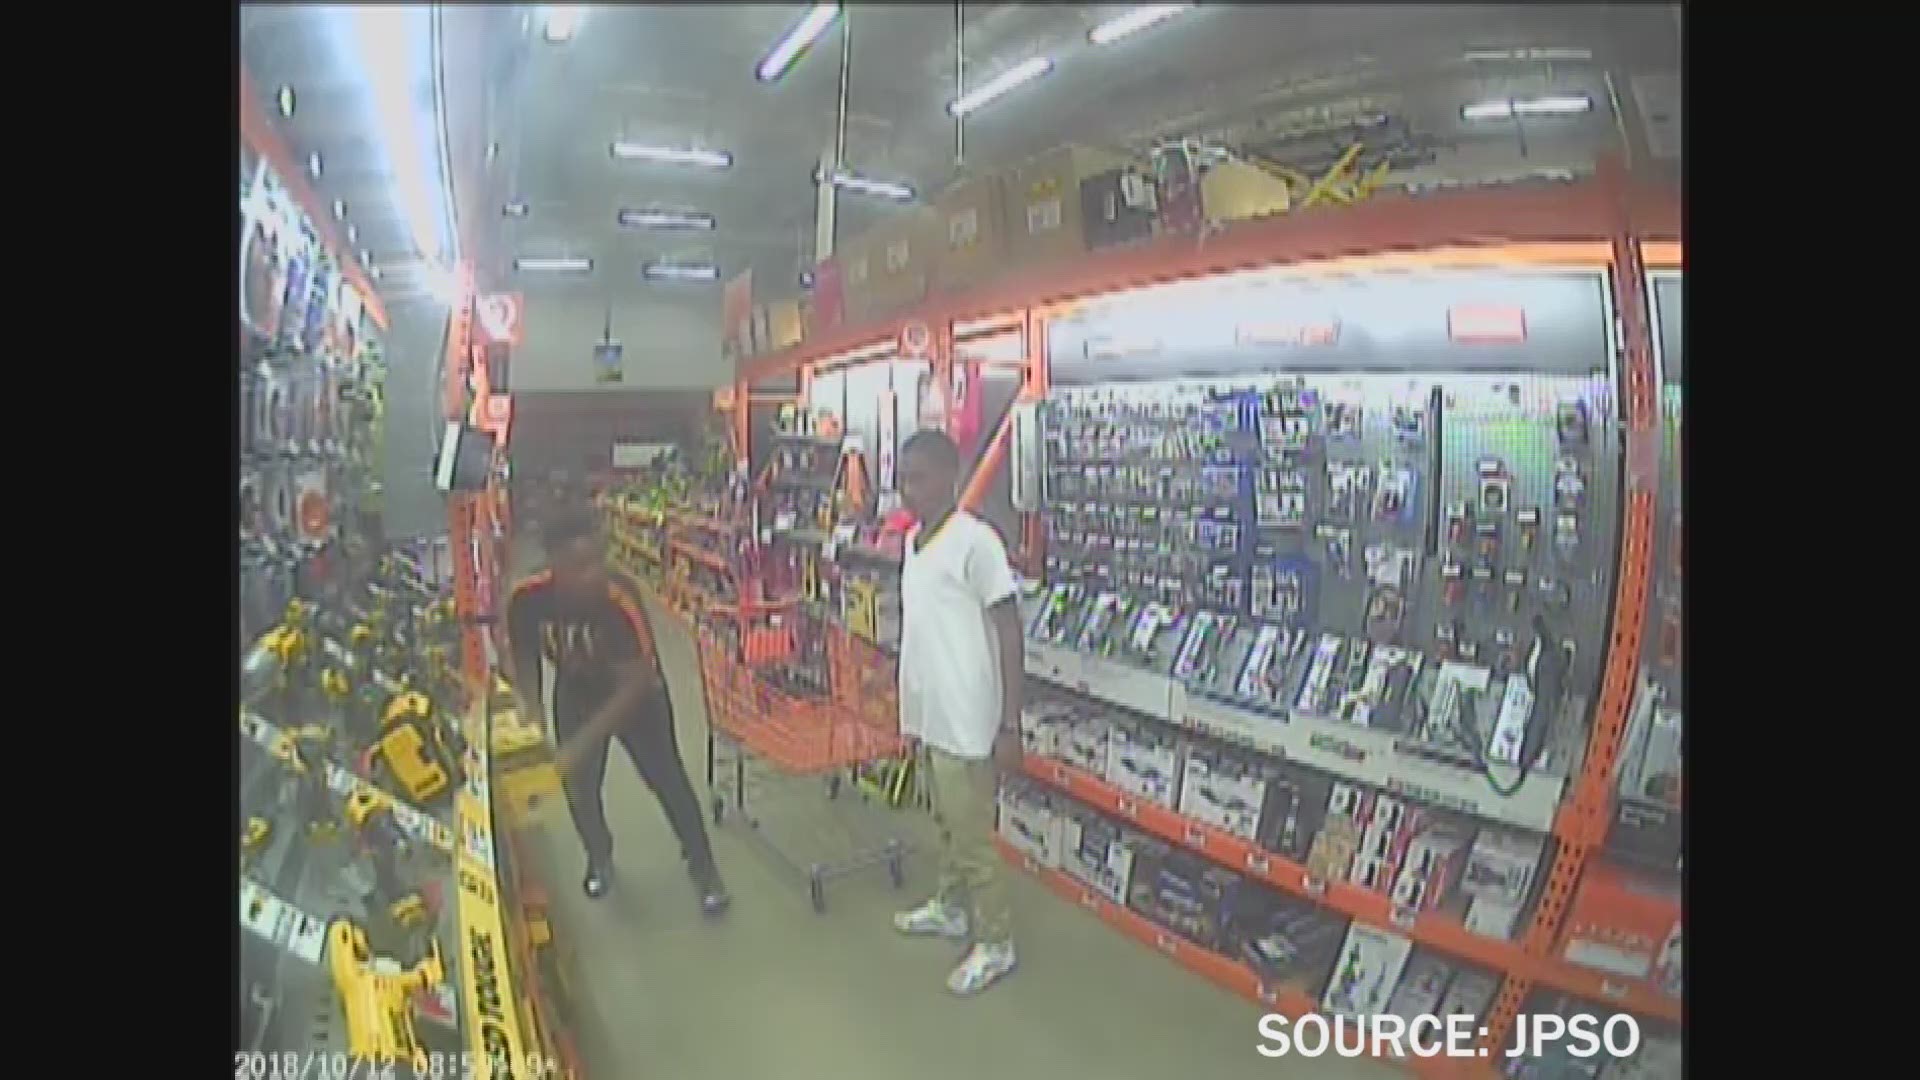 According to the Jefferson Parish Sheriff's Office, the suspects stole $15,000 in power tools on three different days by loading the tools into shopping carts and leaving the store.